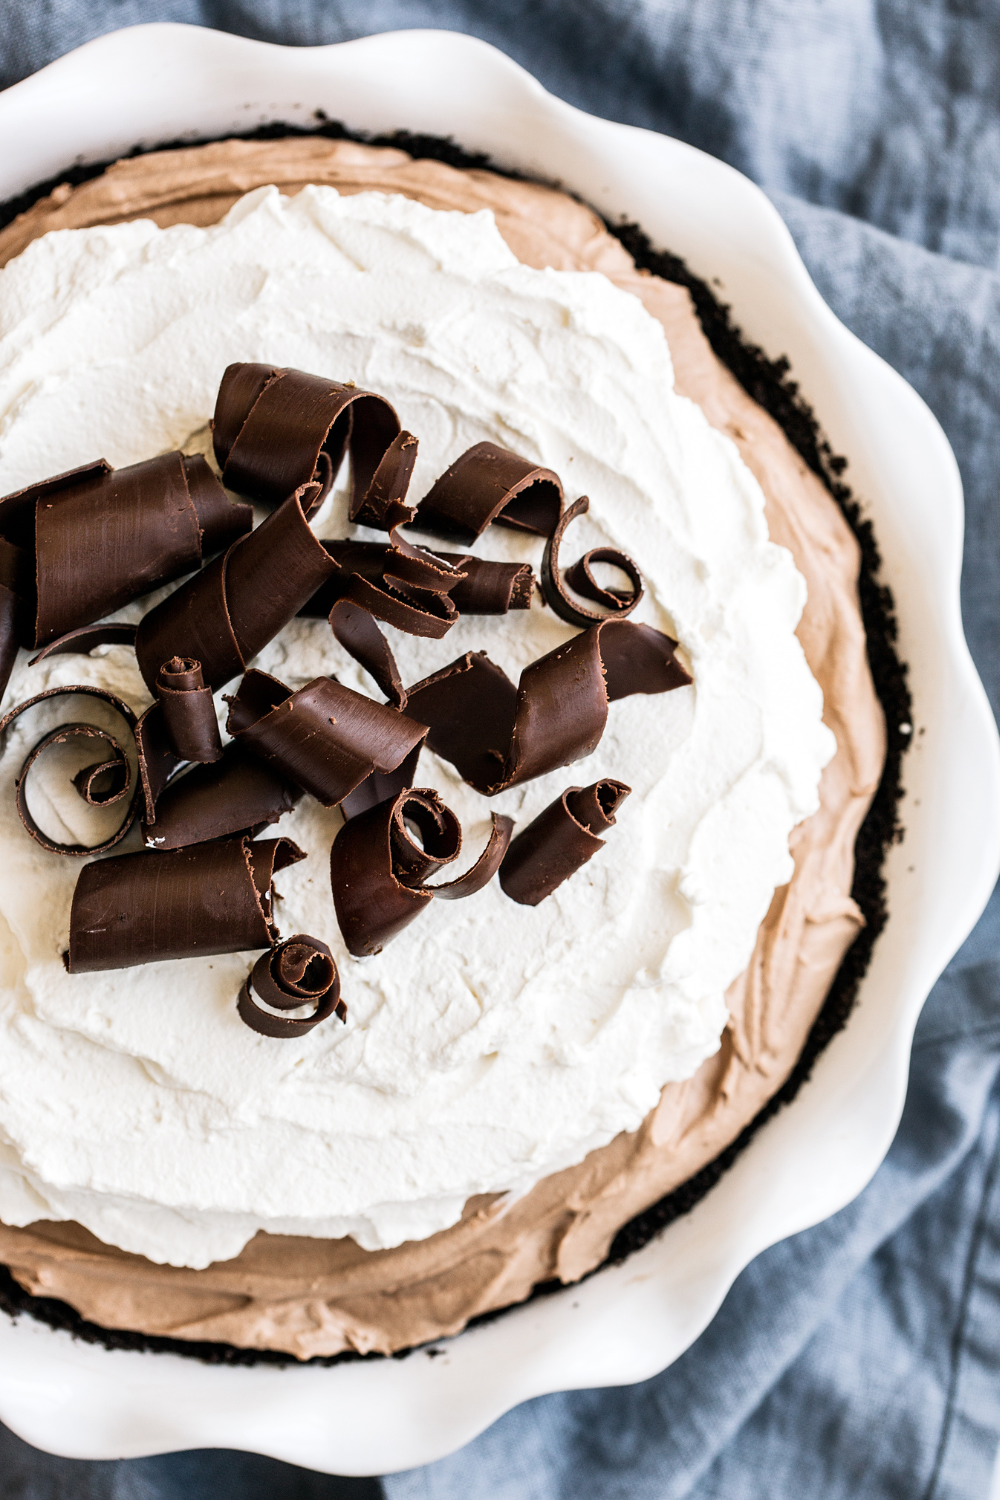 French Silk Pie with whipped cream and chocolate curls on top, in a ceramic pie pan.